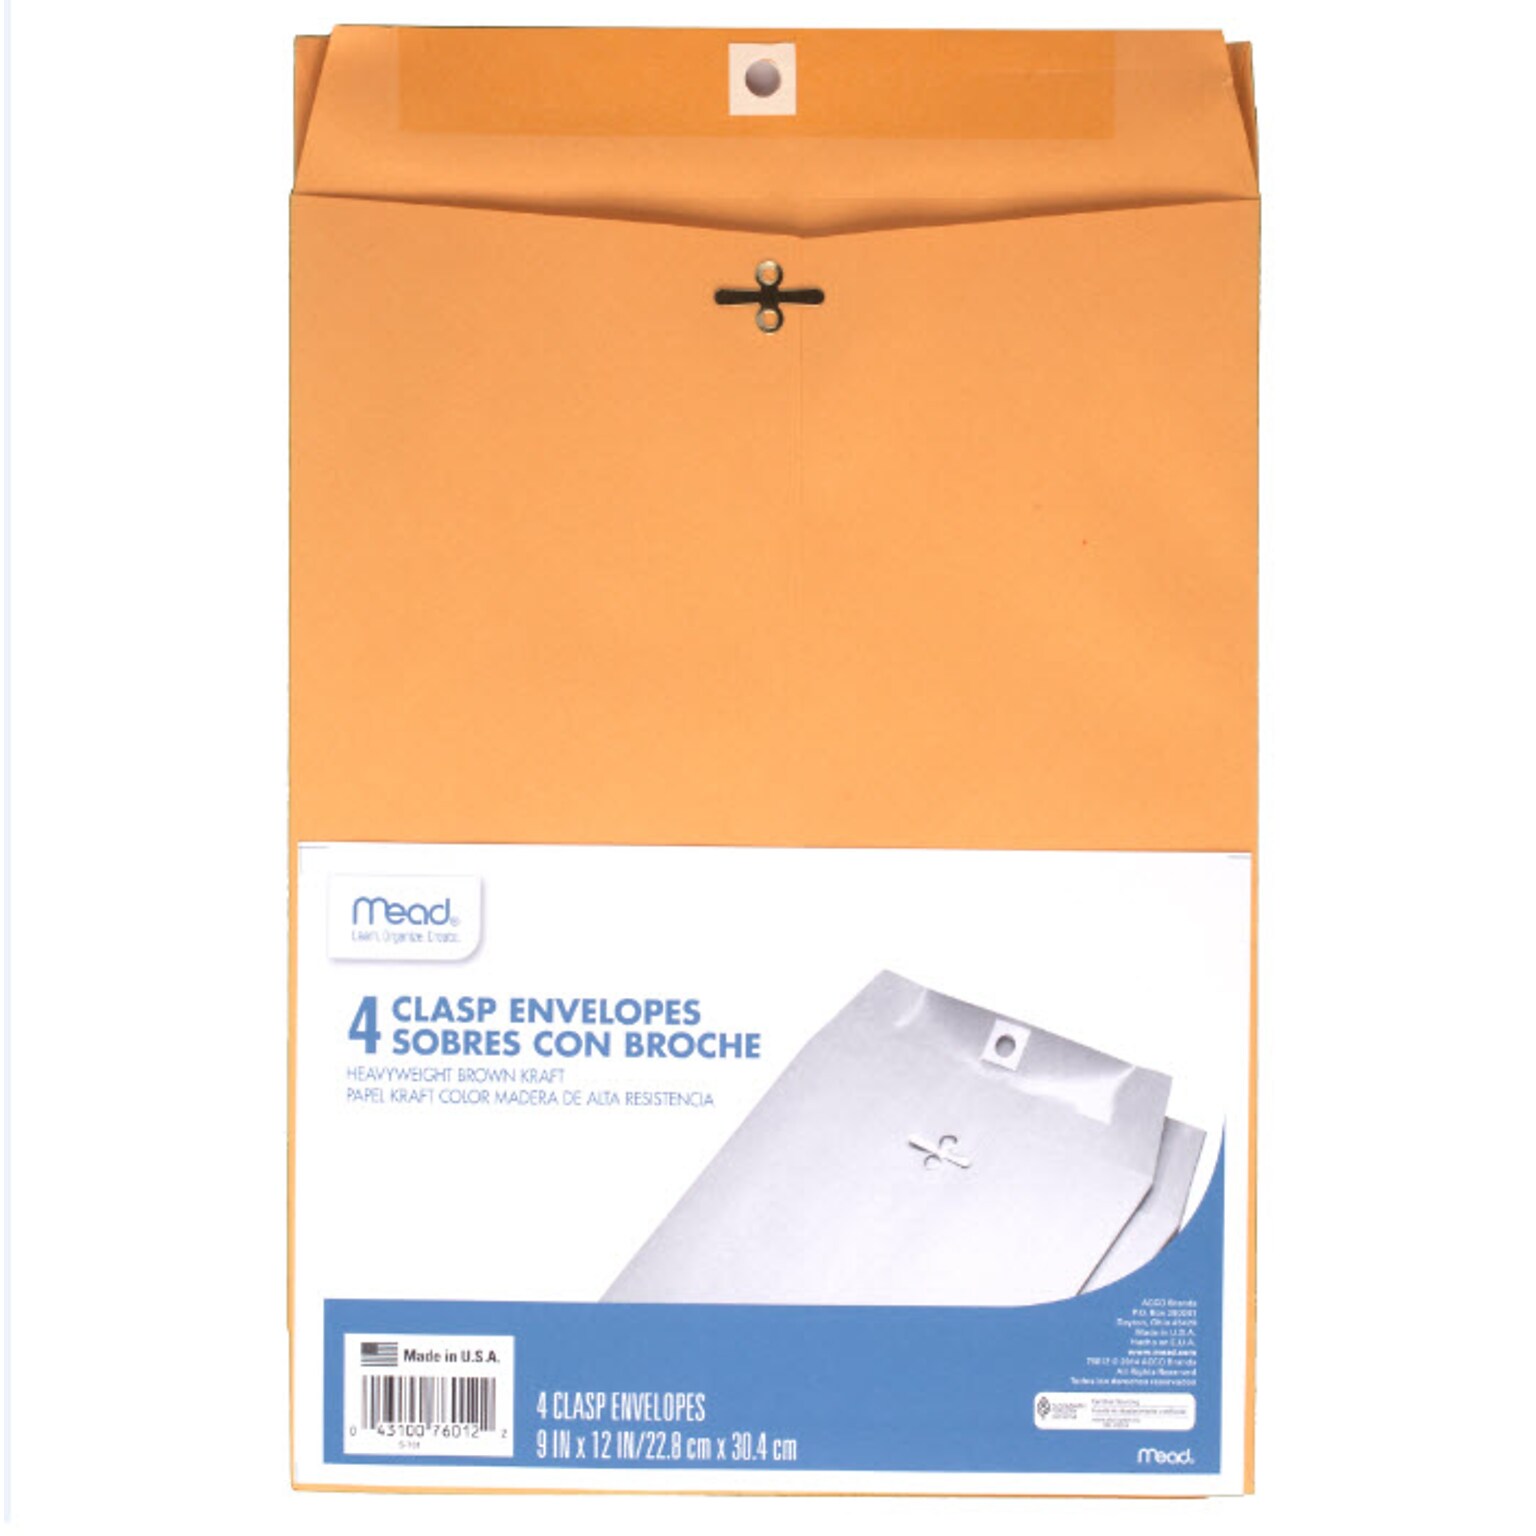 Mead Clasp Envelopes, 9 X 12, Heavyweight Kraft, 4 Count (76012)